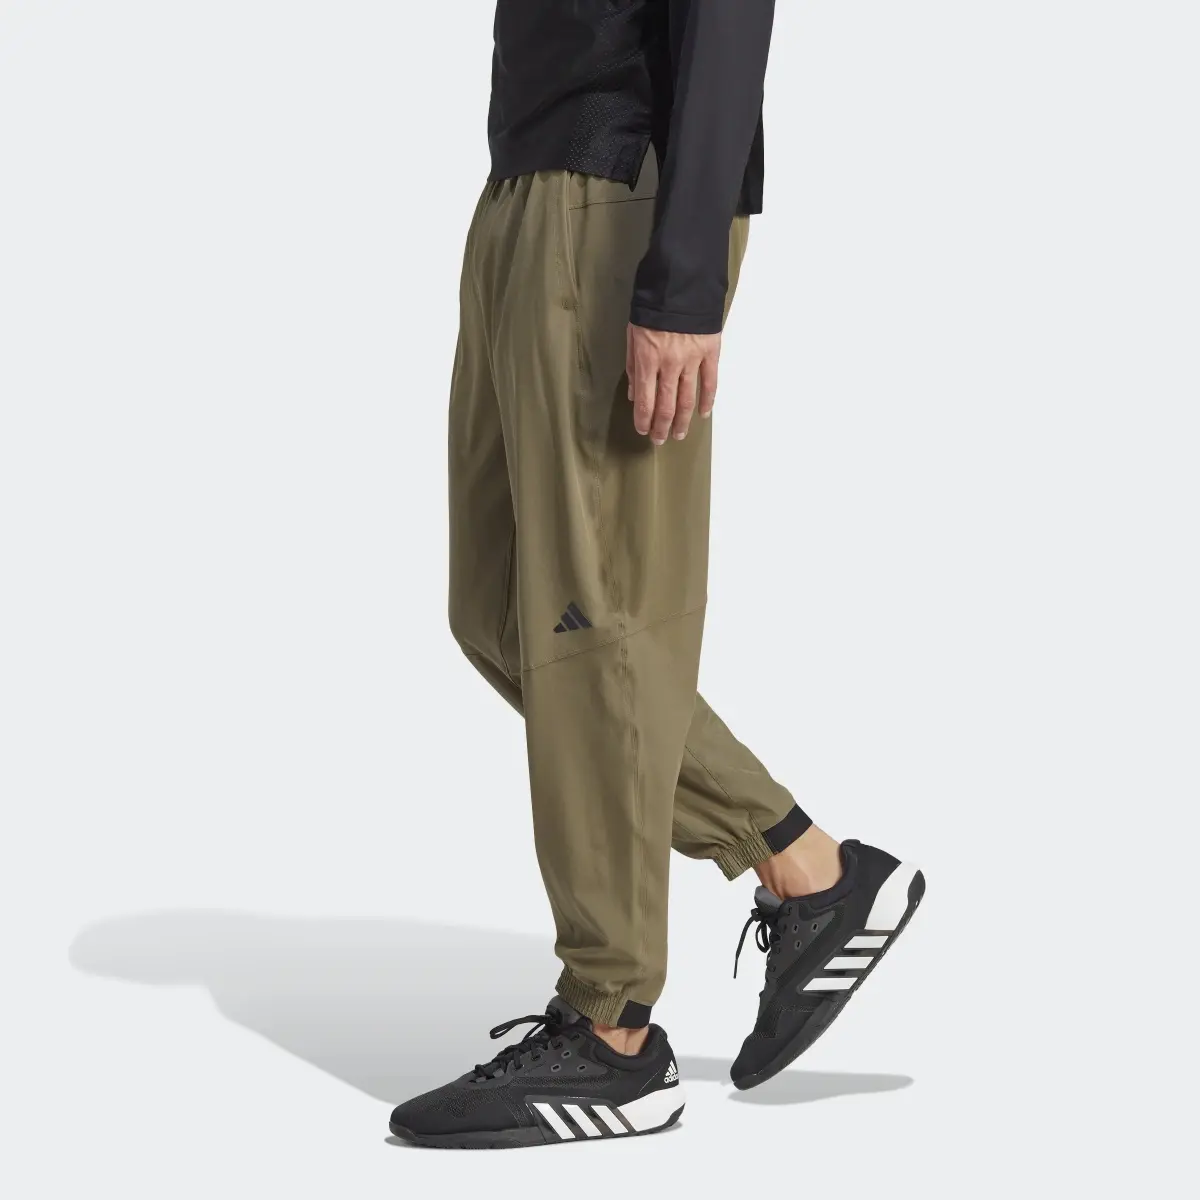 Adidas Designed for Training Pro Series Strength Joggers. 2